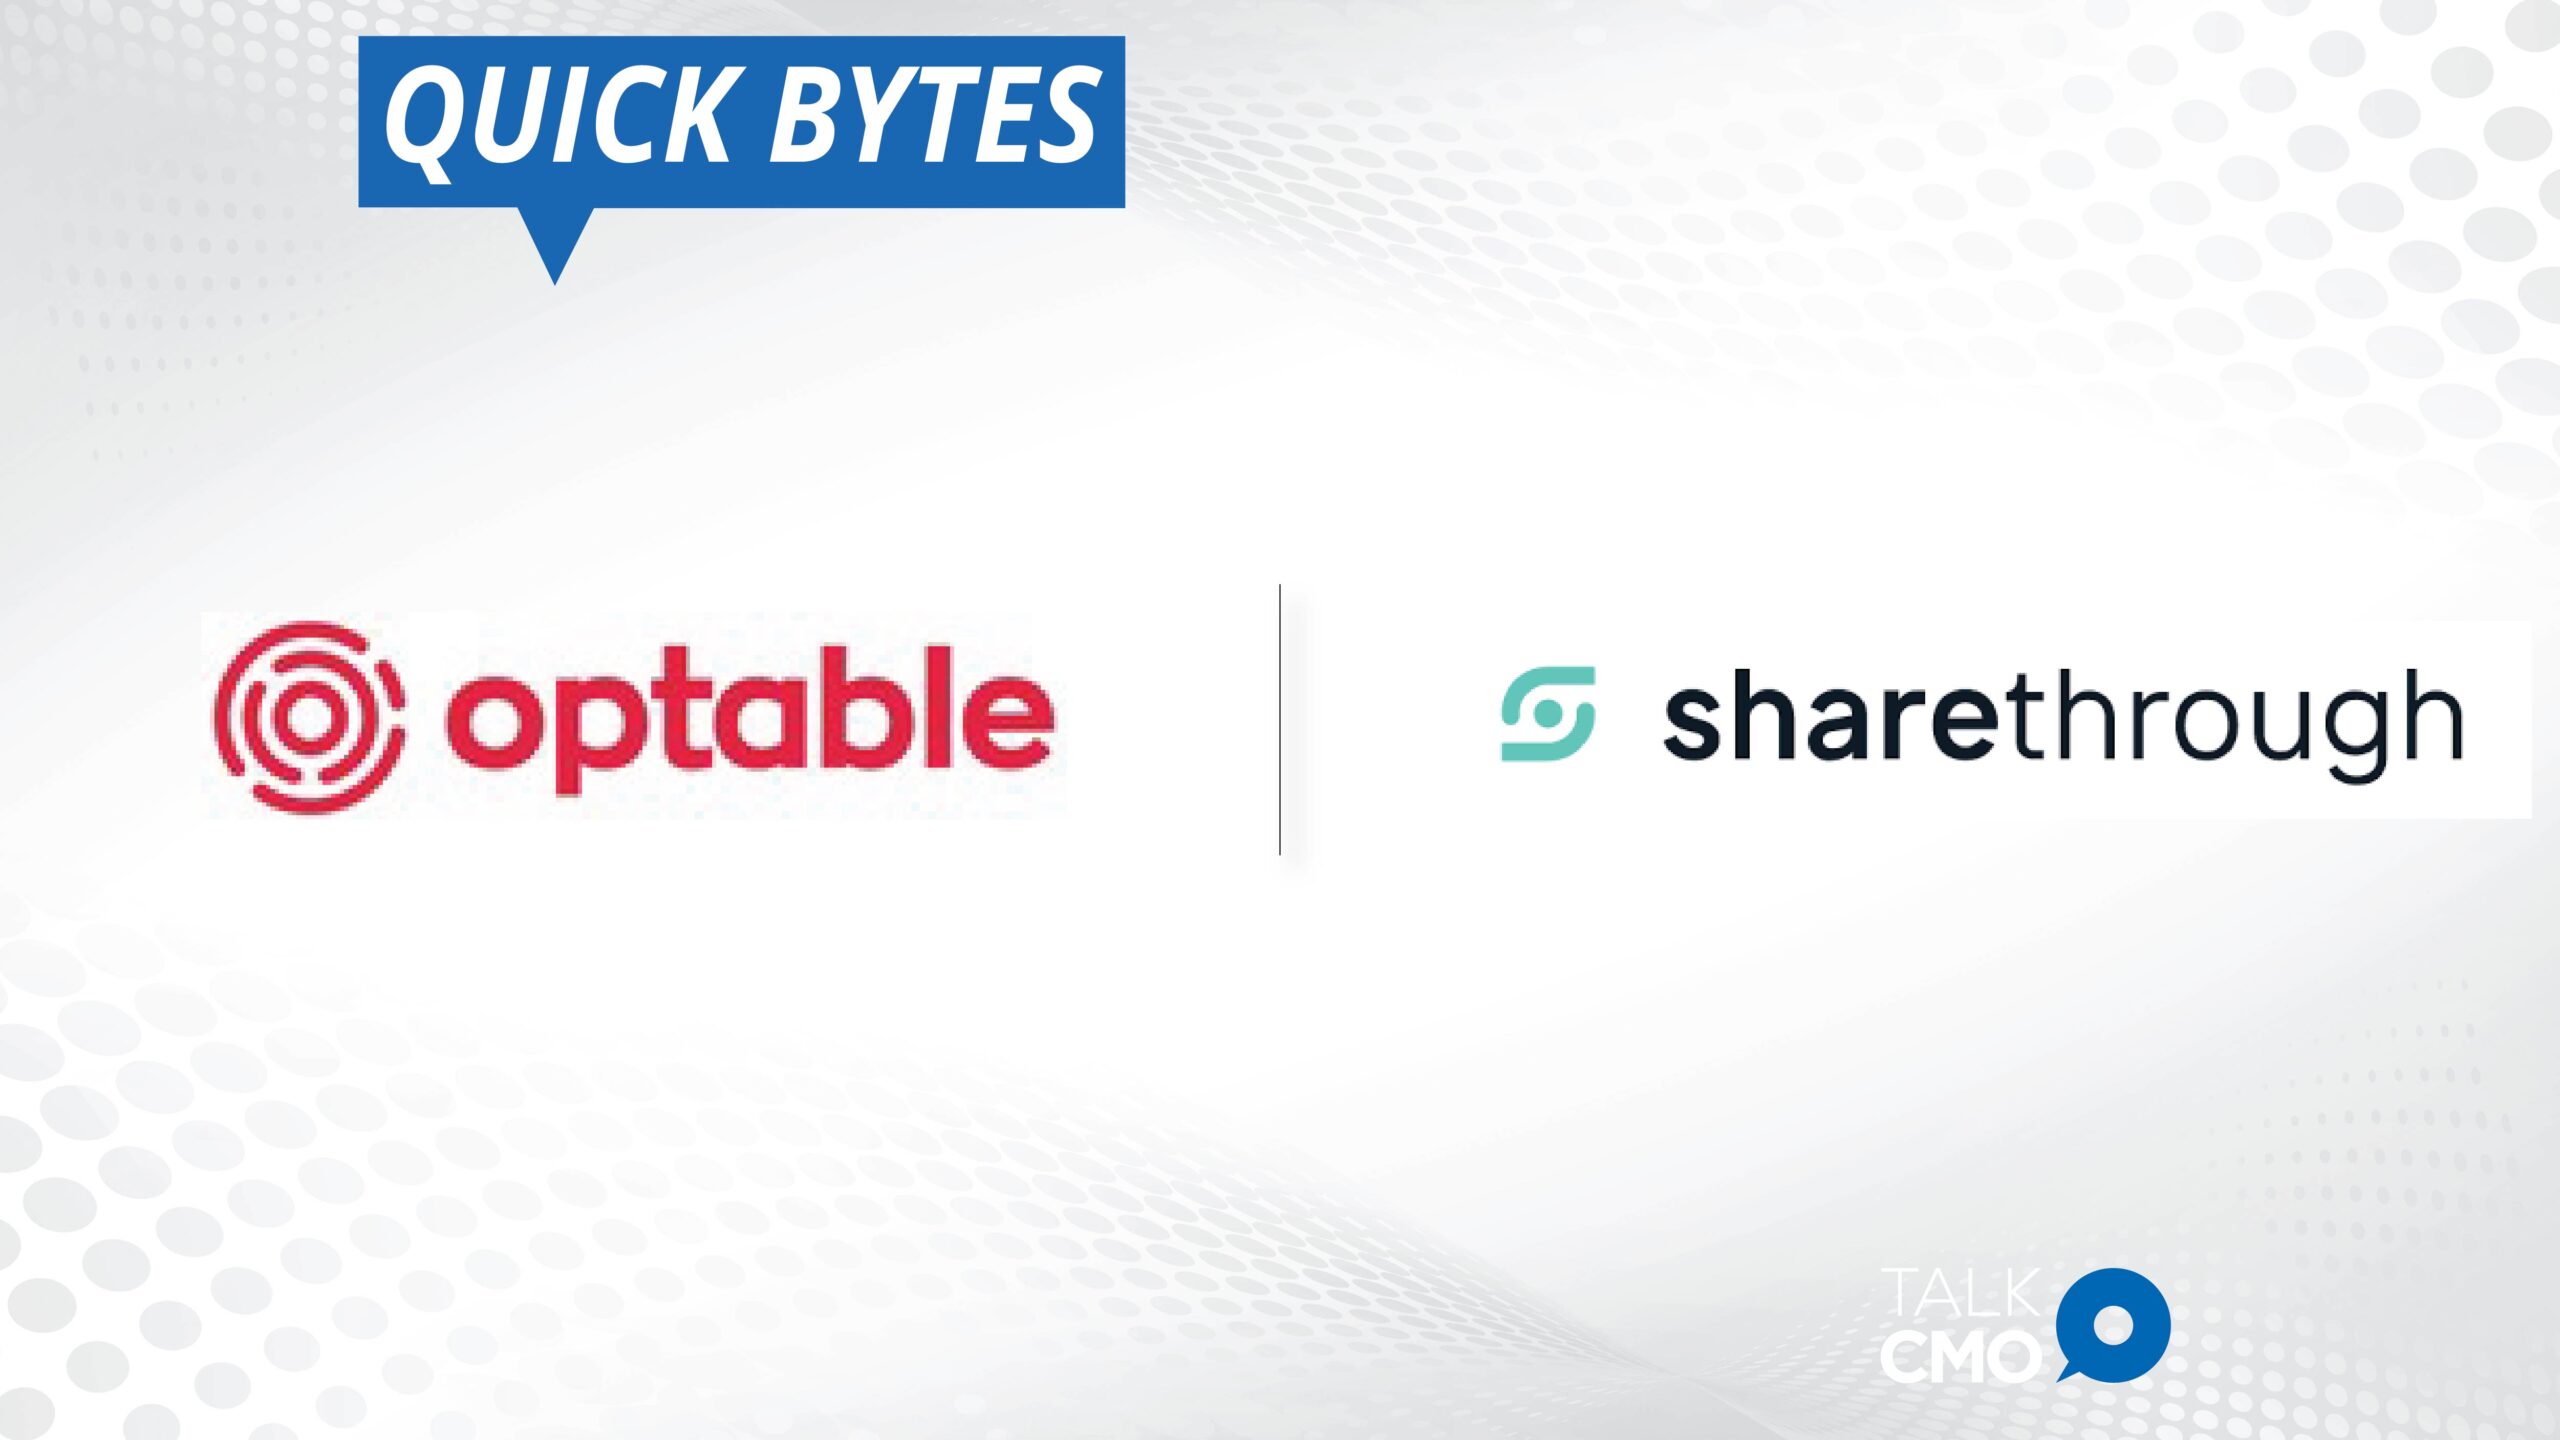 Sharethrough Customers Can Use Optable To Boost Secure Data Collaboration-01